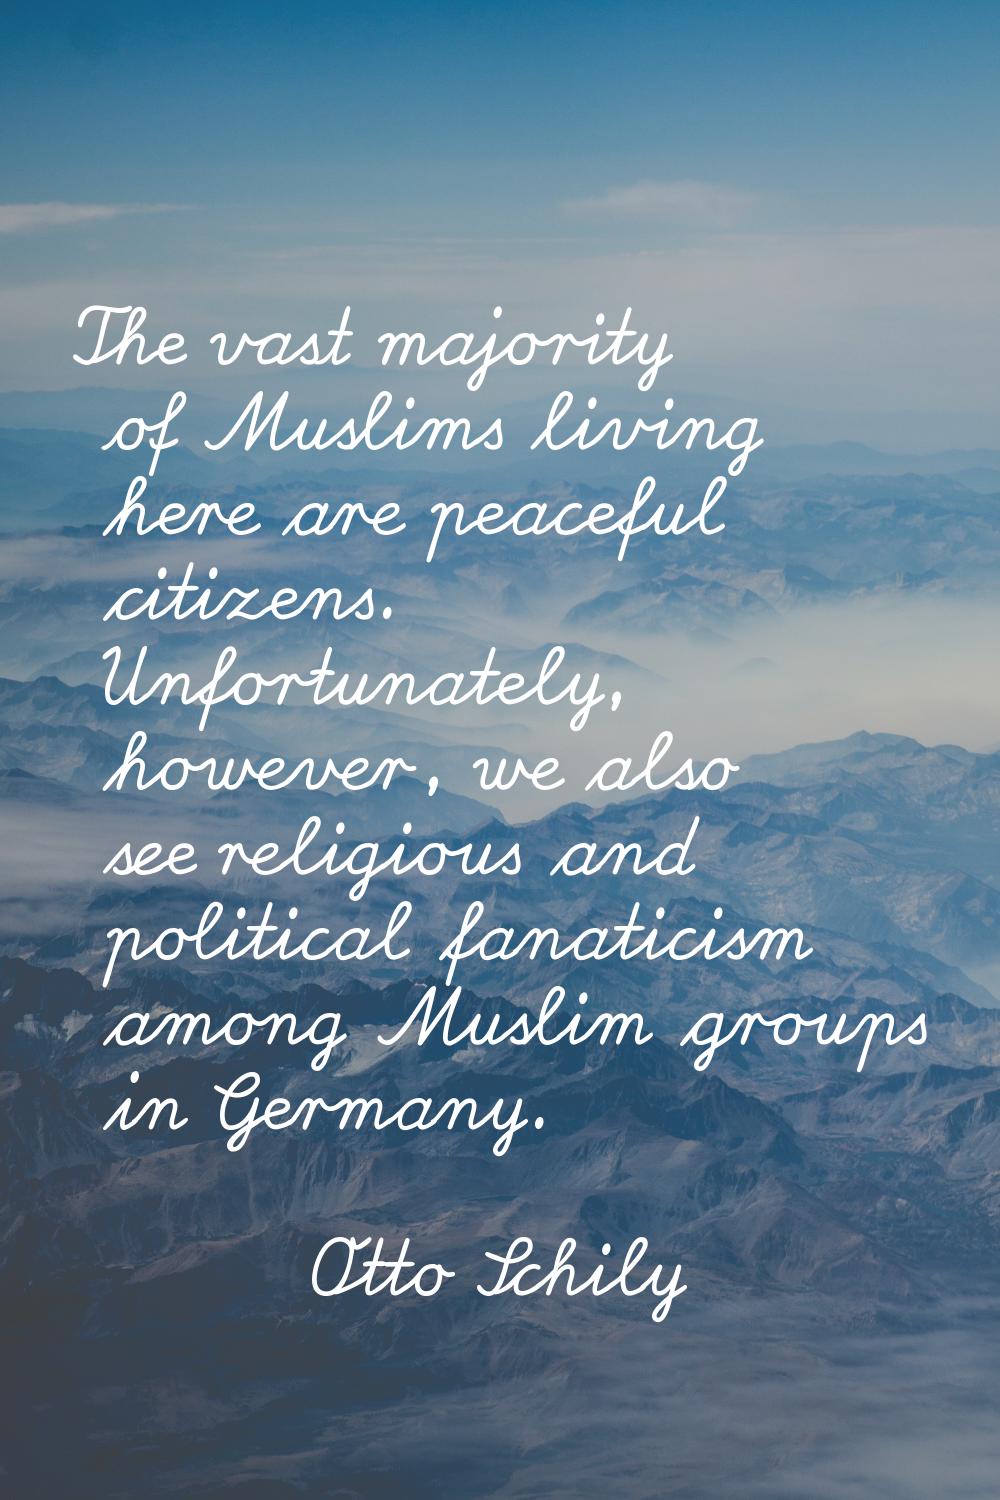 The vast majority of Muslims living here are peaceful citizens. Unfortunately, however, we also see